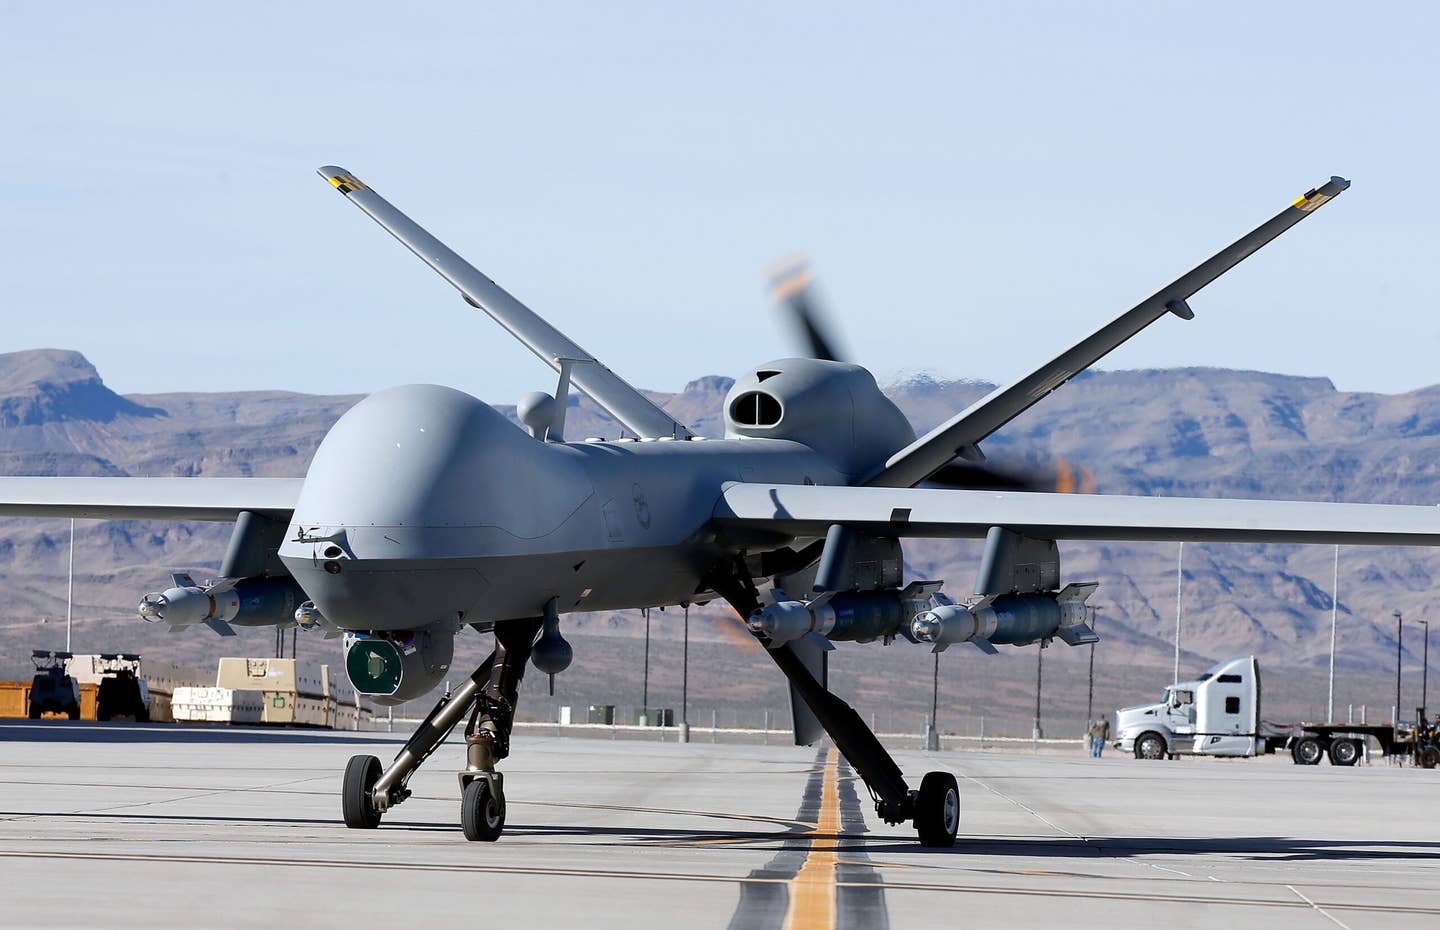 An MQ-9 Reaper taxis during a training mission at Creech Air Force Base on November 17, 2015, in Indian Springs, Nevada. <em>Credit: Photo by Isaac Brekken/Getty Images</em>